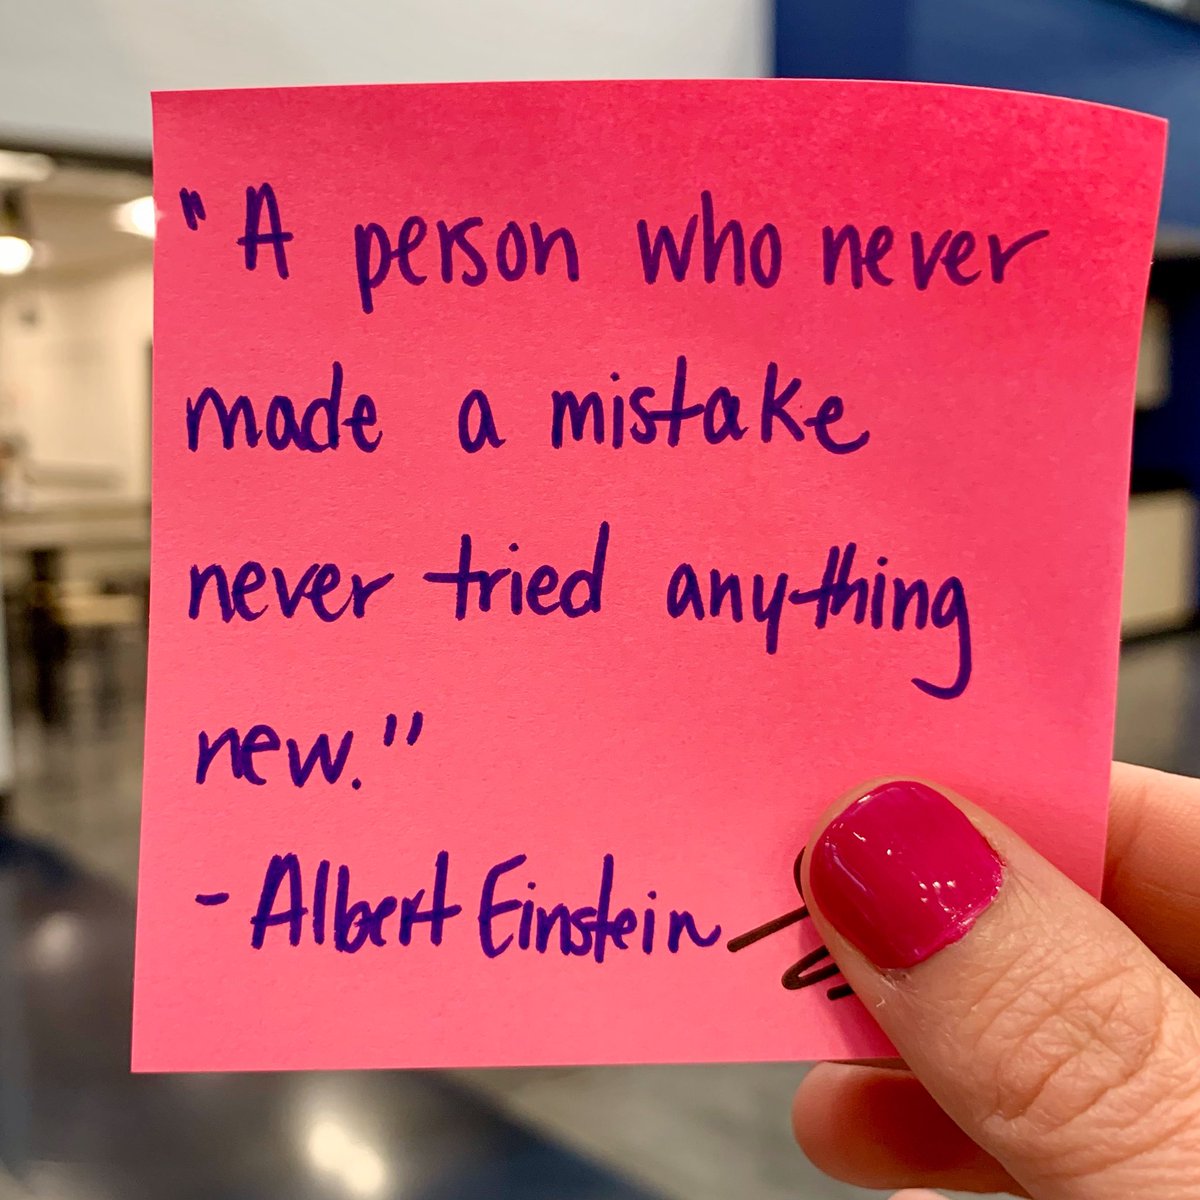 It’s a new week to take learning risks and try something new! #mondaymotivation #pmlearns